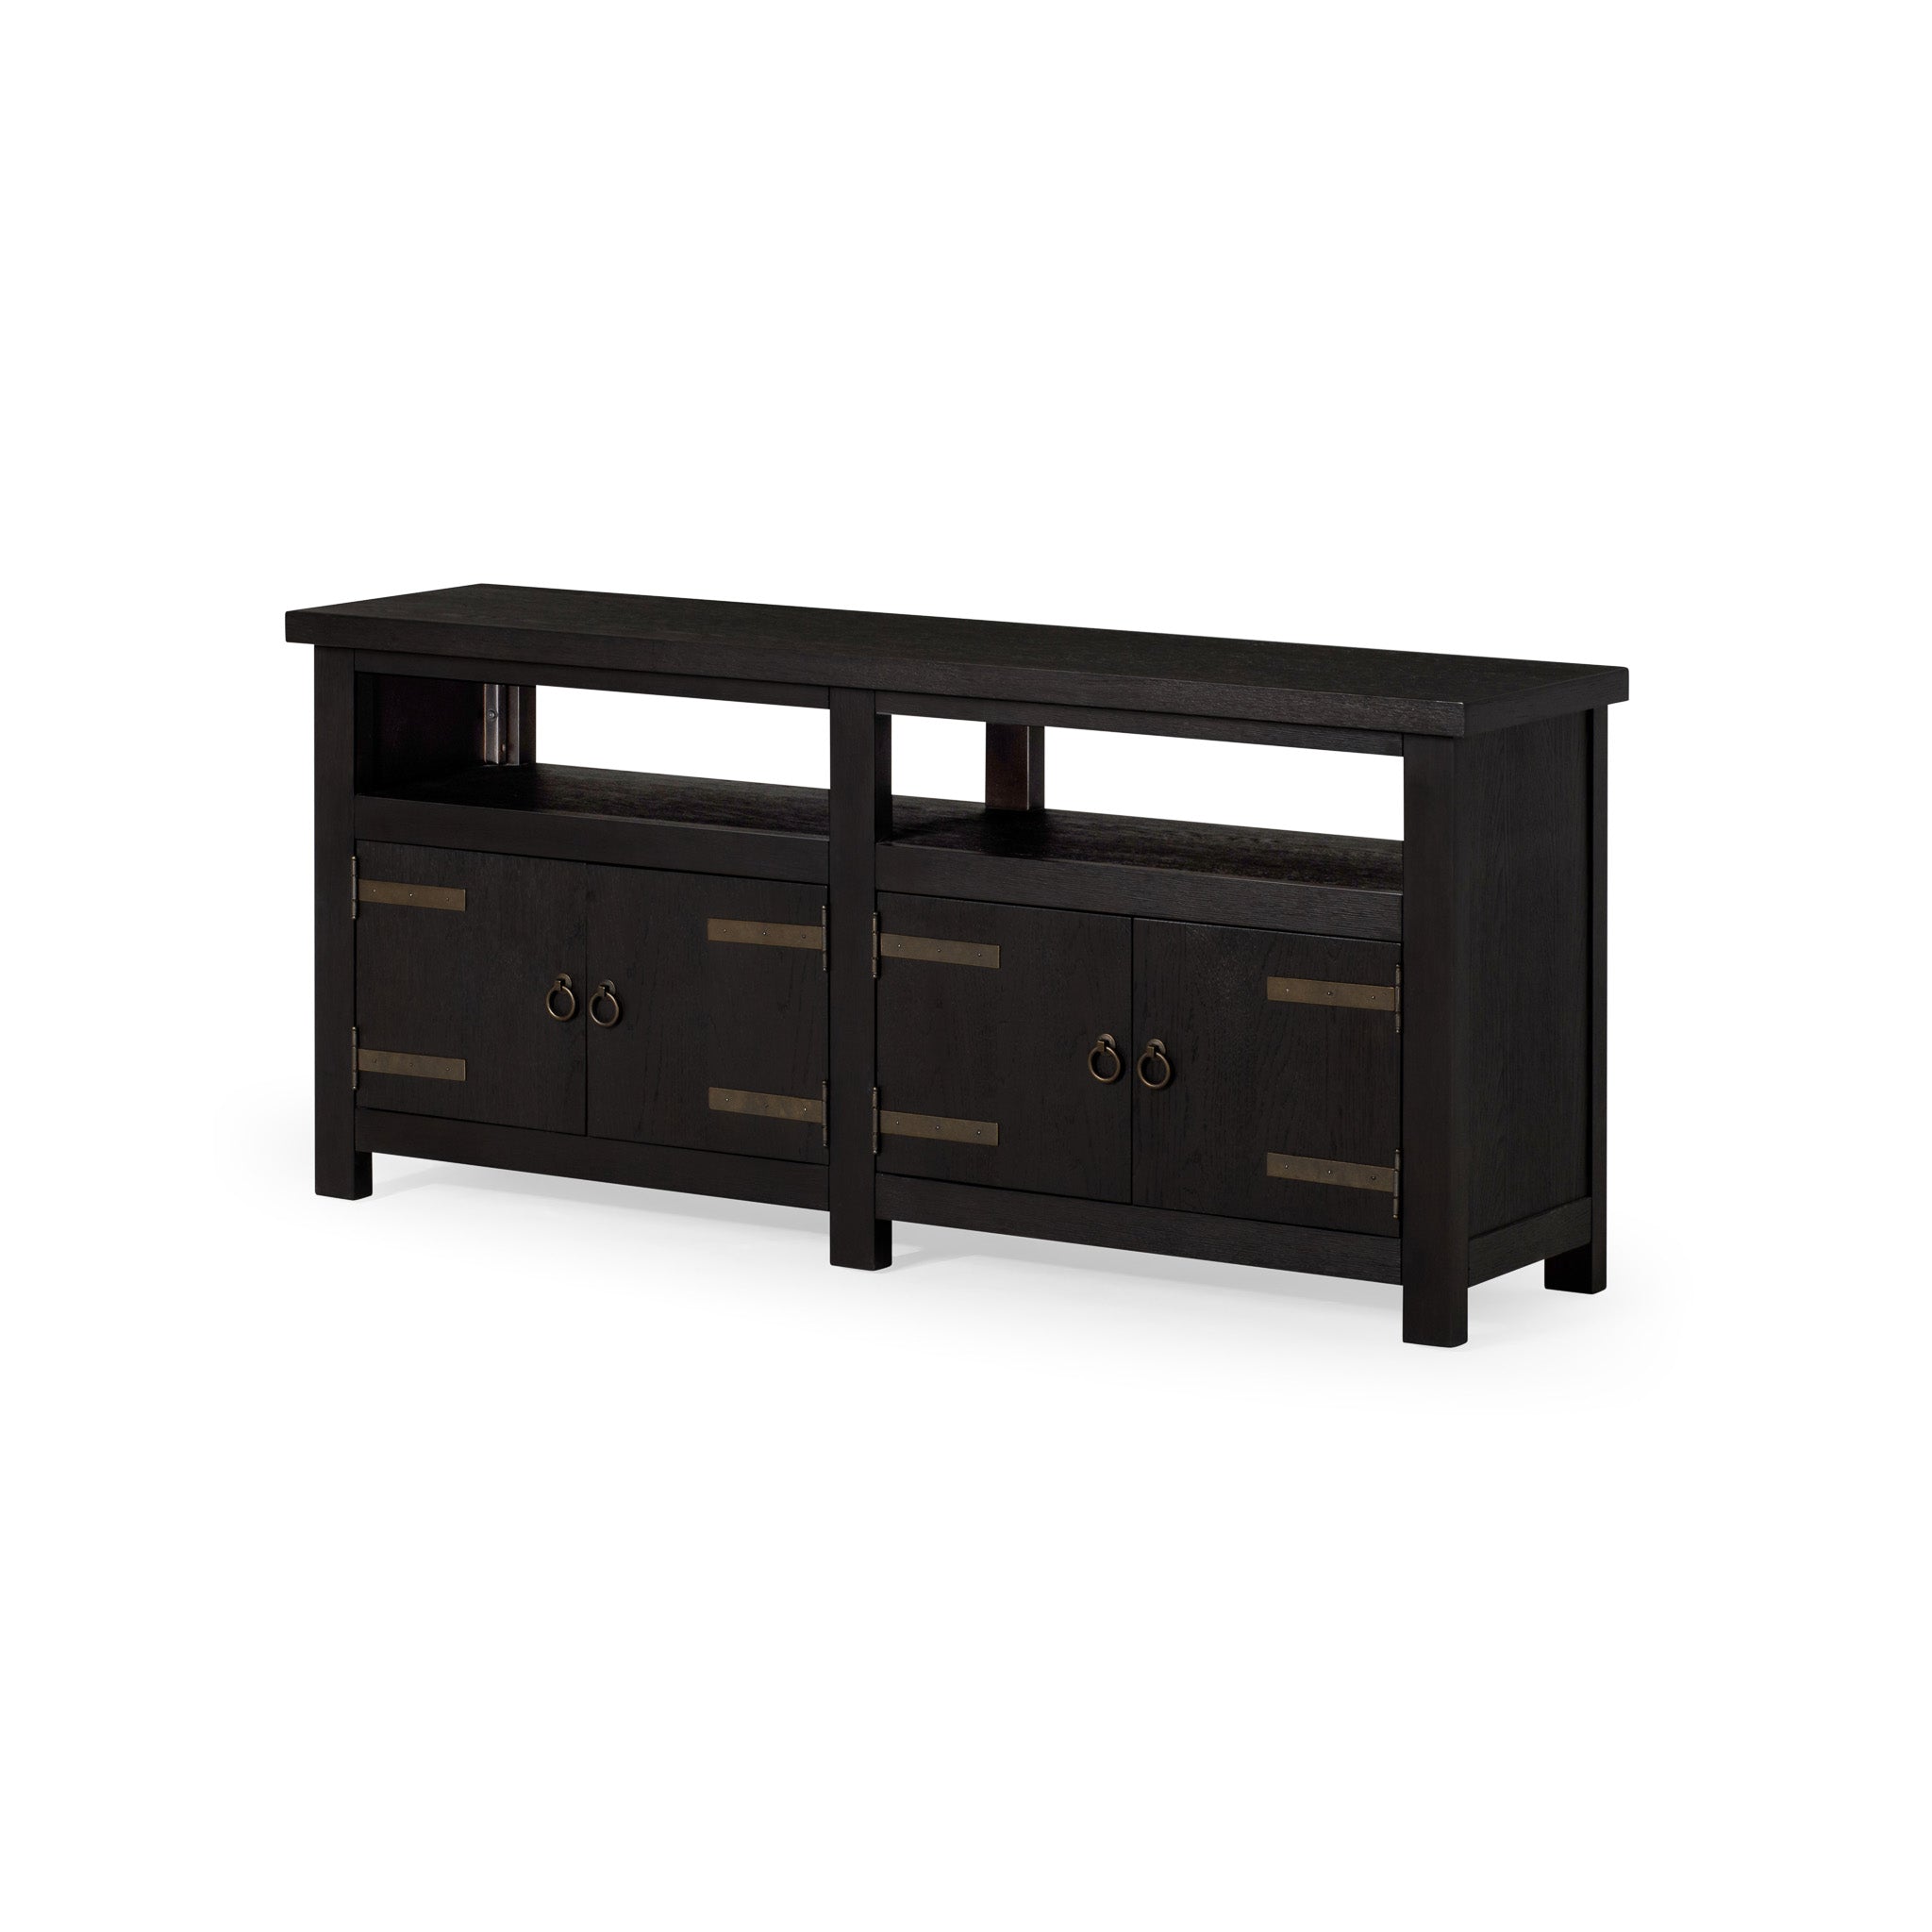 Luca Organic Wooden Media Unit in Weathered Black Finish in Media Units by Maven Lane